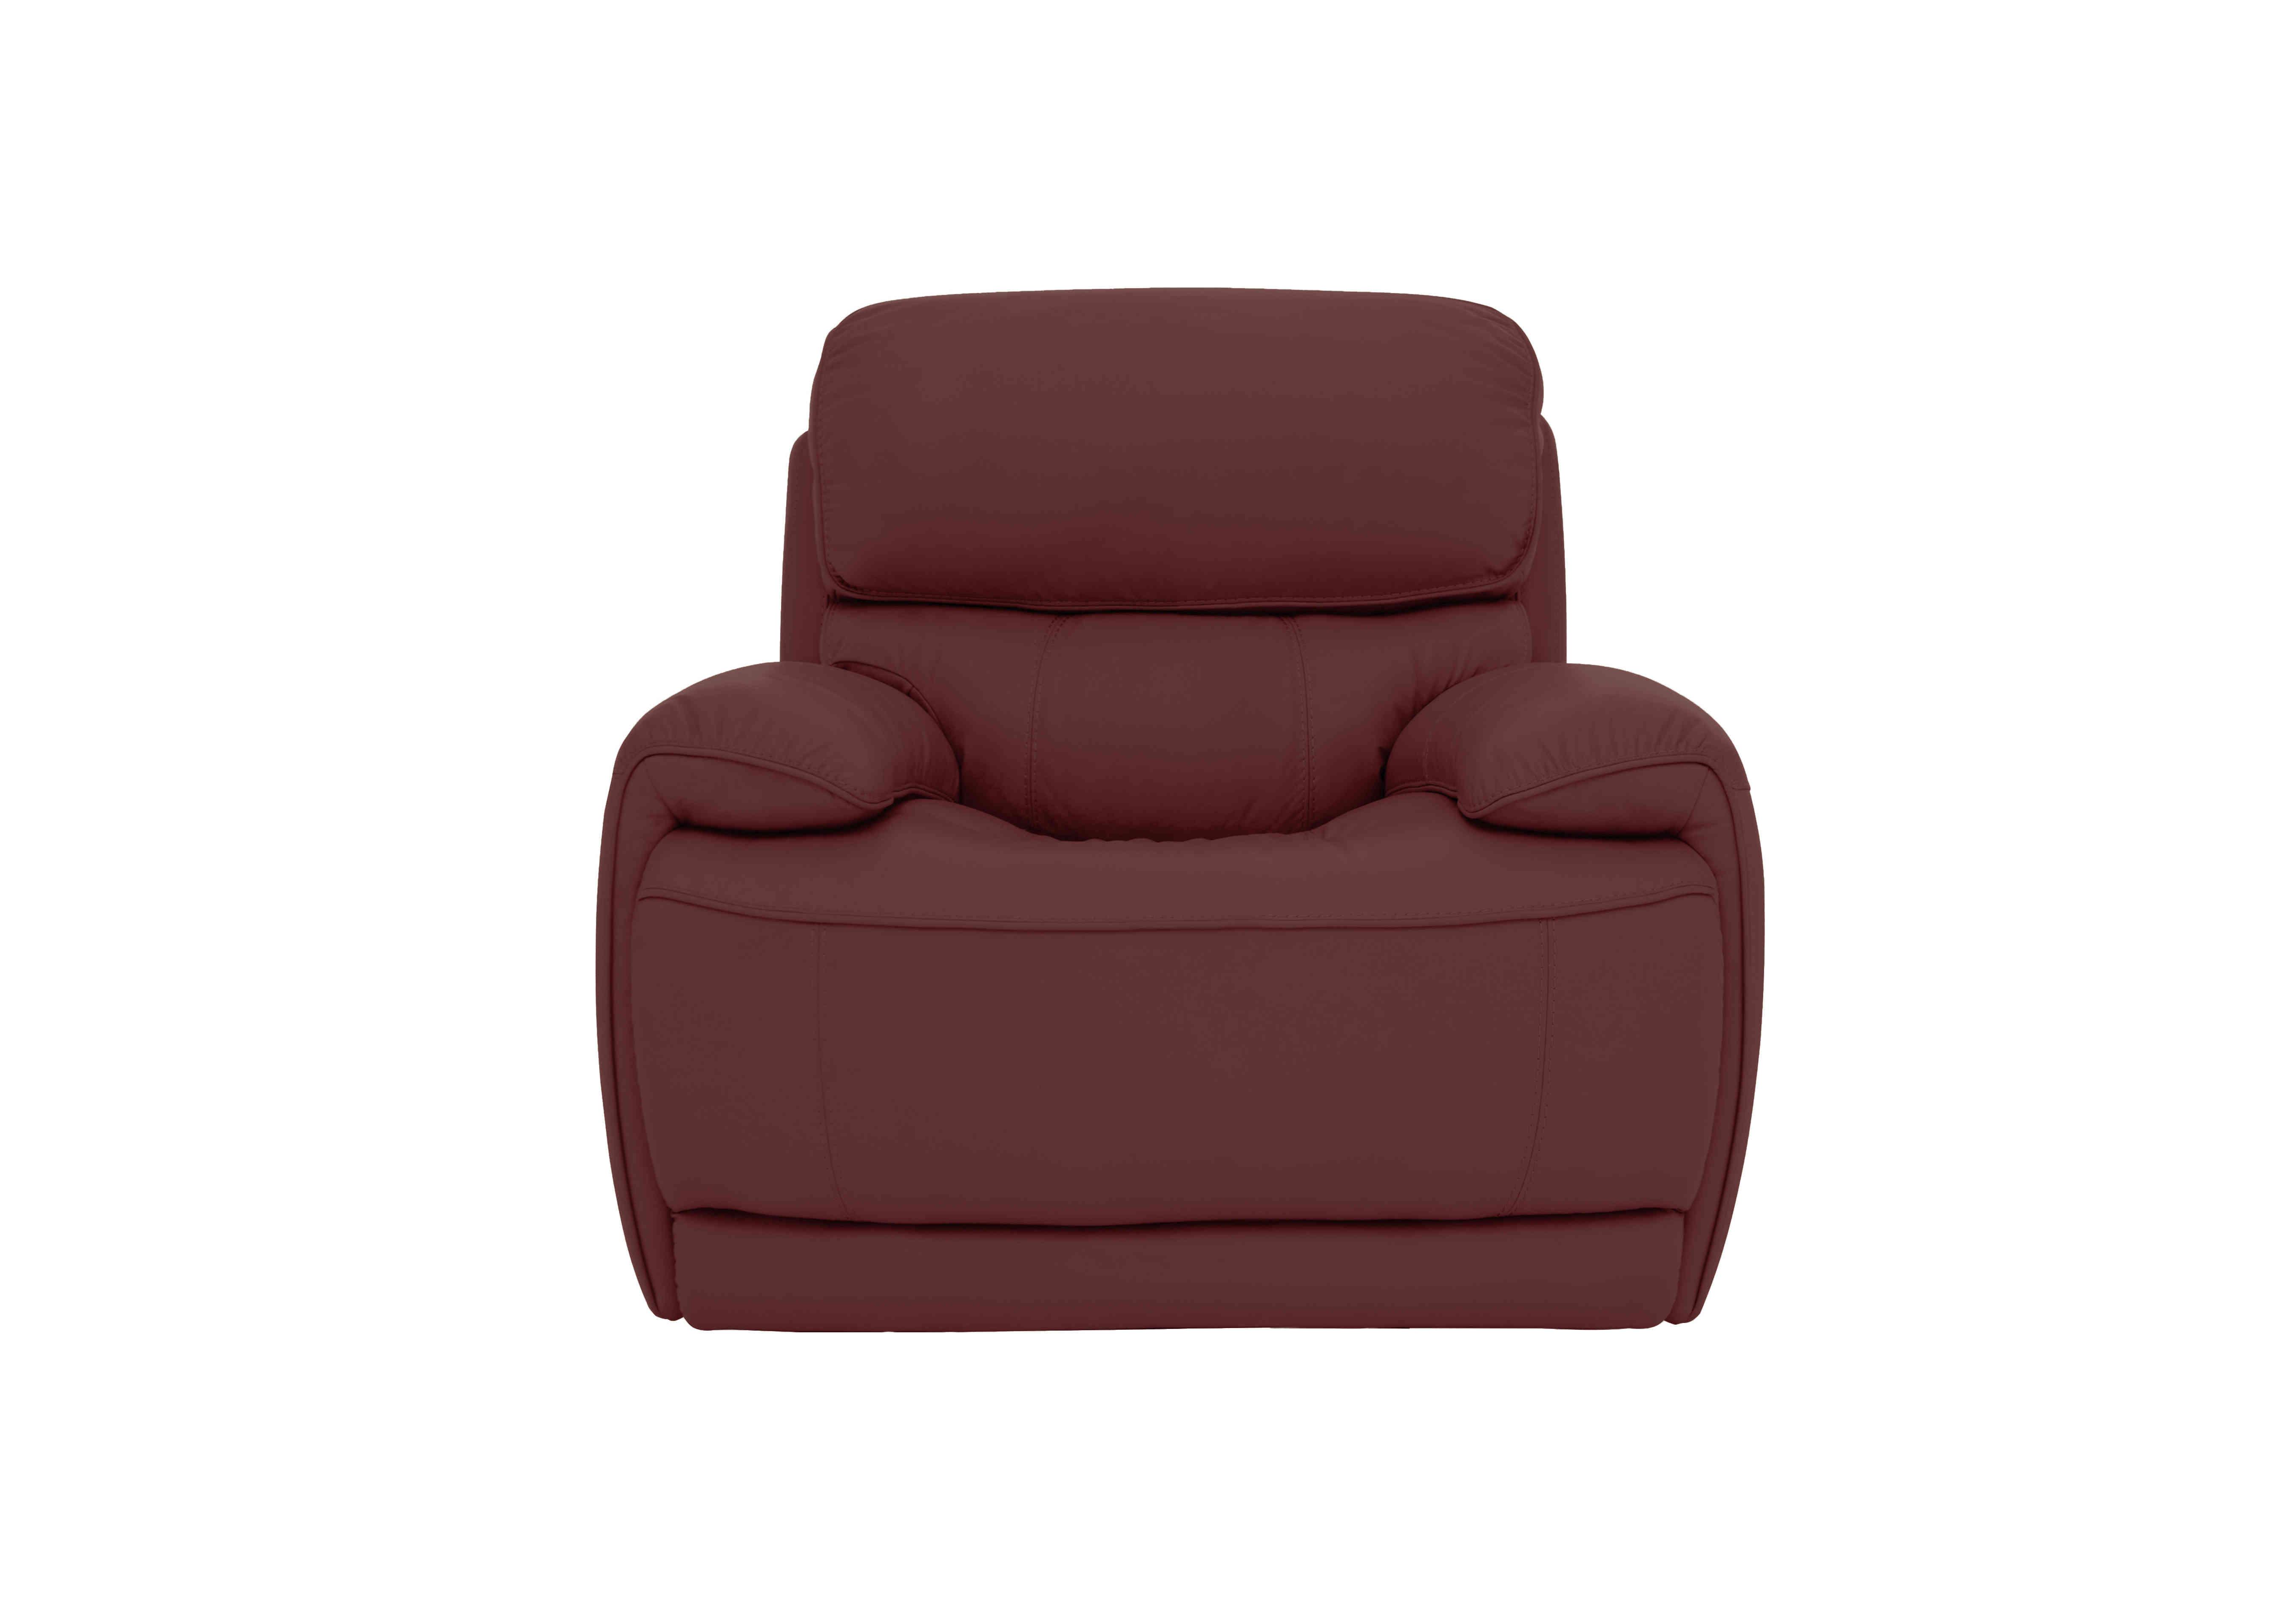 Rocco Leather Power Rocker Armchair with Power Headrests in Bv-035c Deep Red on Furniture Village